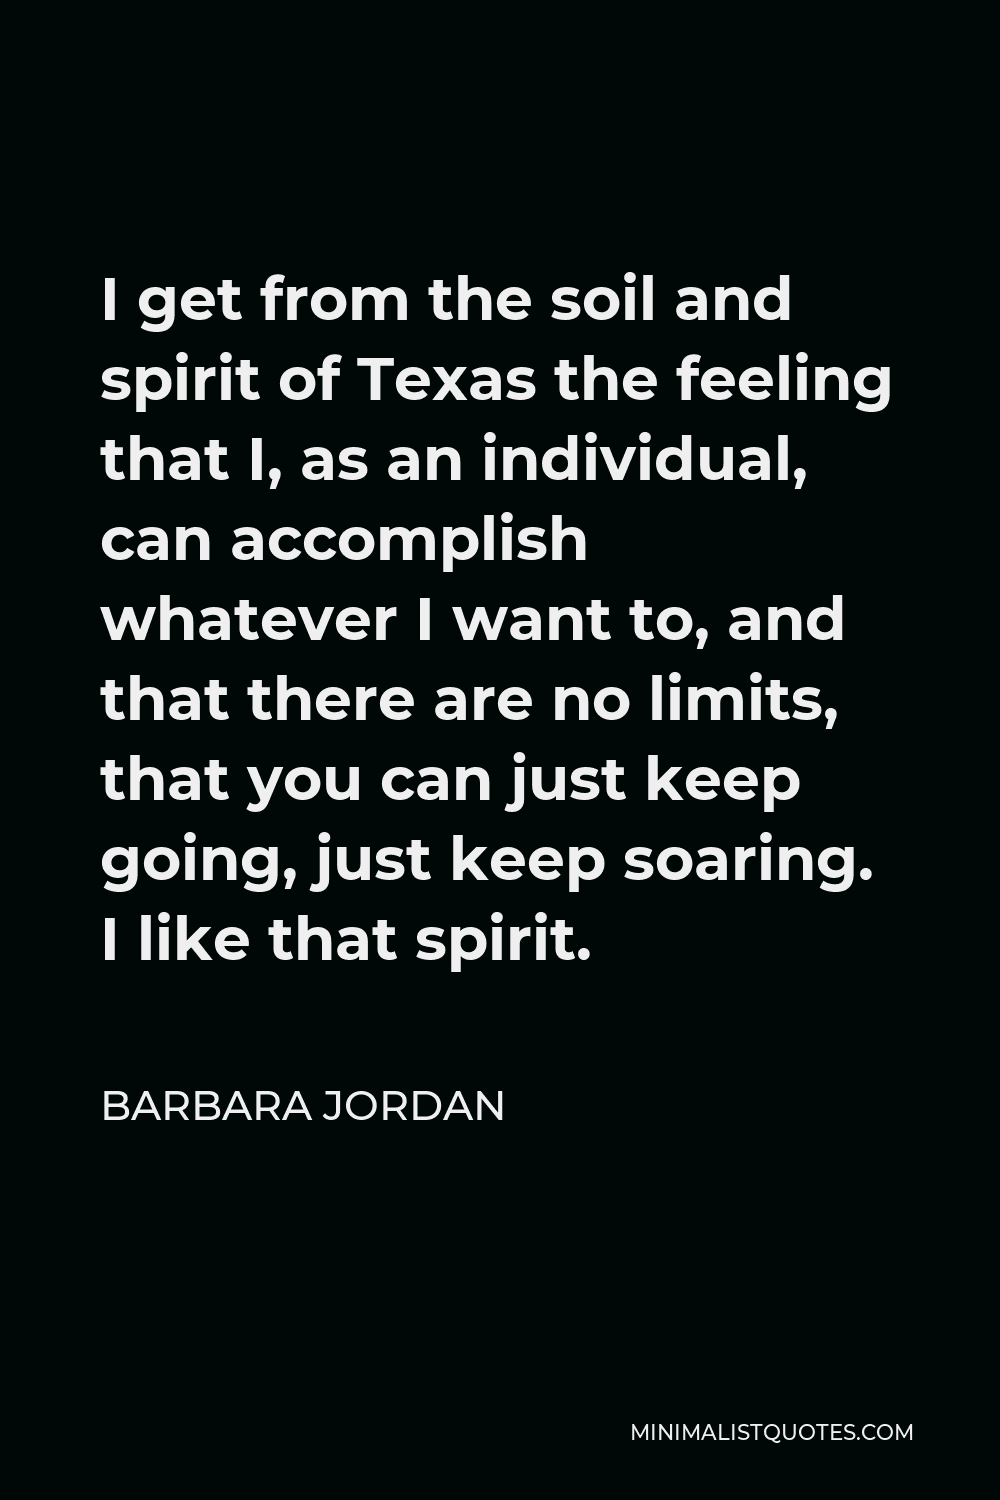 Barbara Jordan Quote - I get from the soil and spirit of Texas the feeling that I, as an individual, can accomplish whatever I want to, and that there are no limits, that you can just keep going, just keep soaring. I like that spirit.